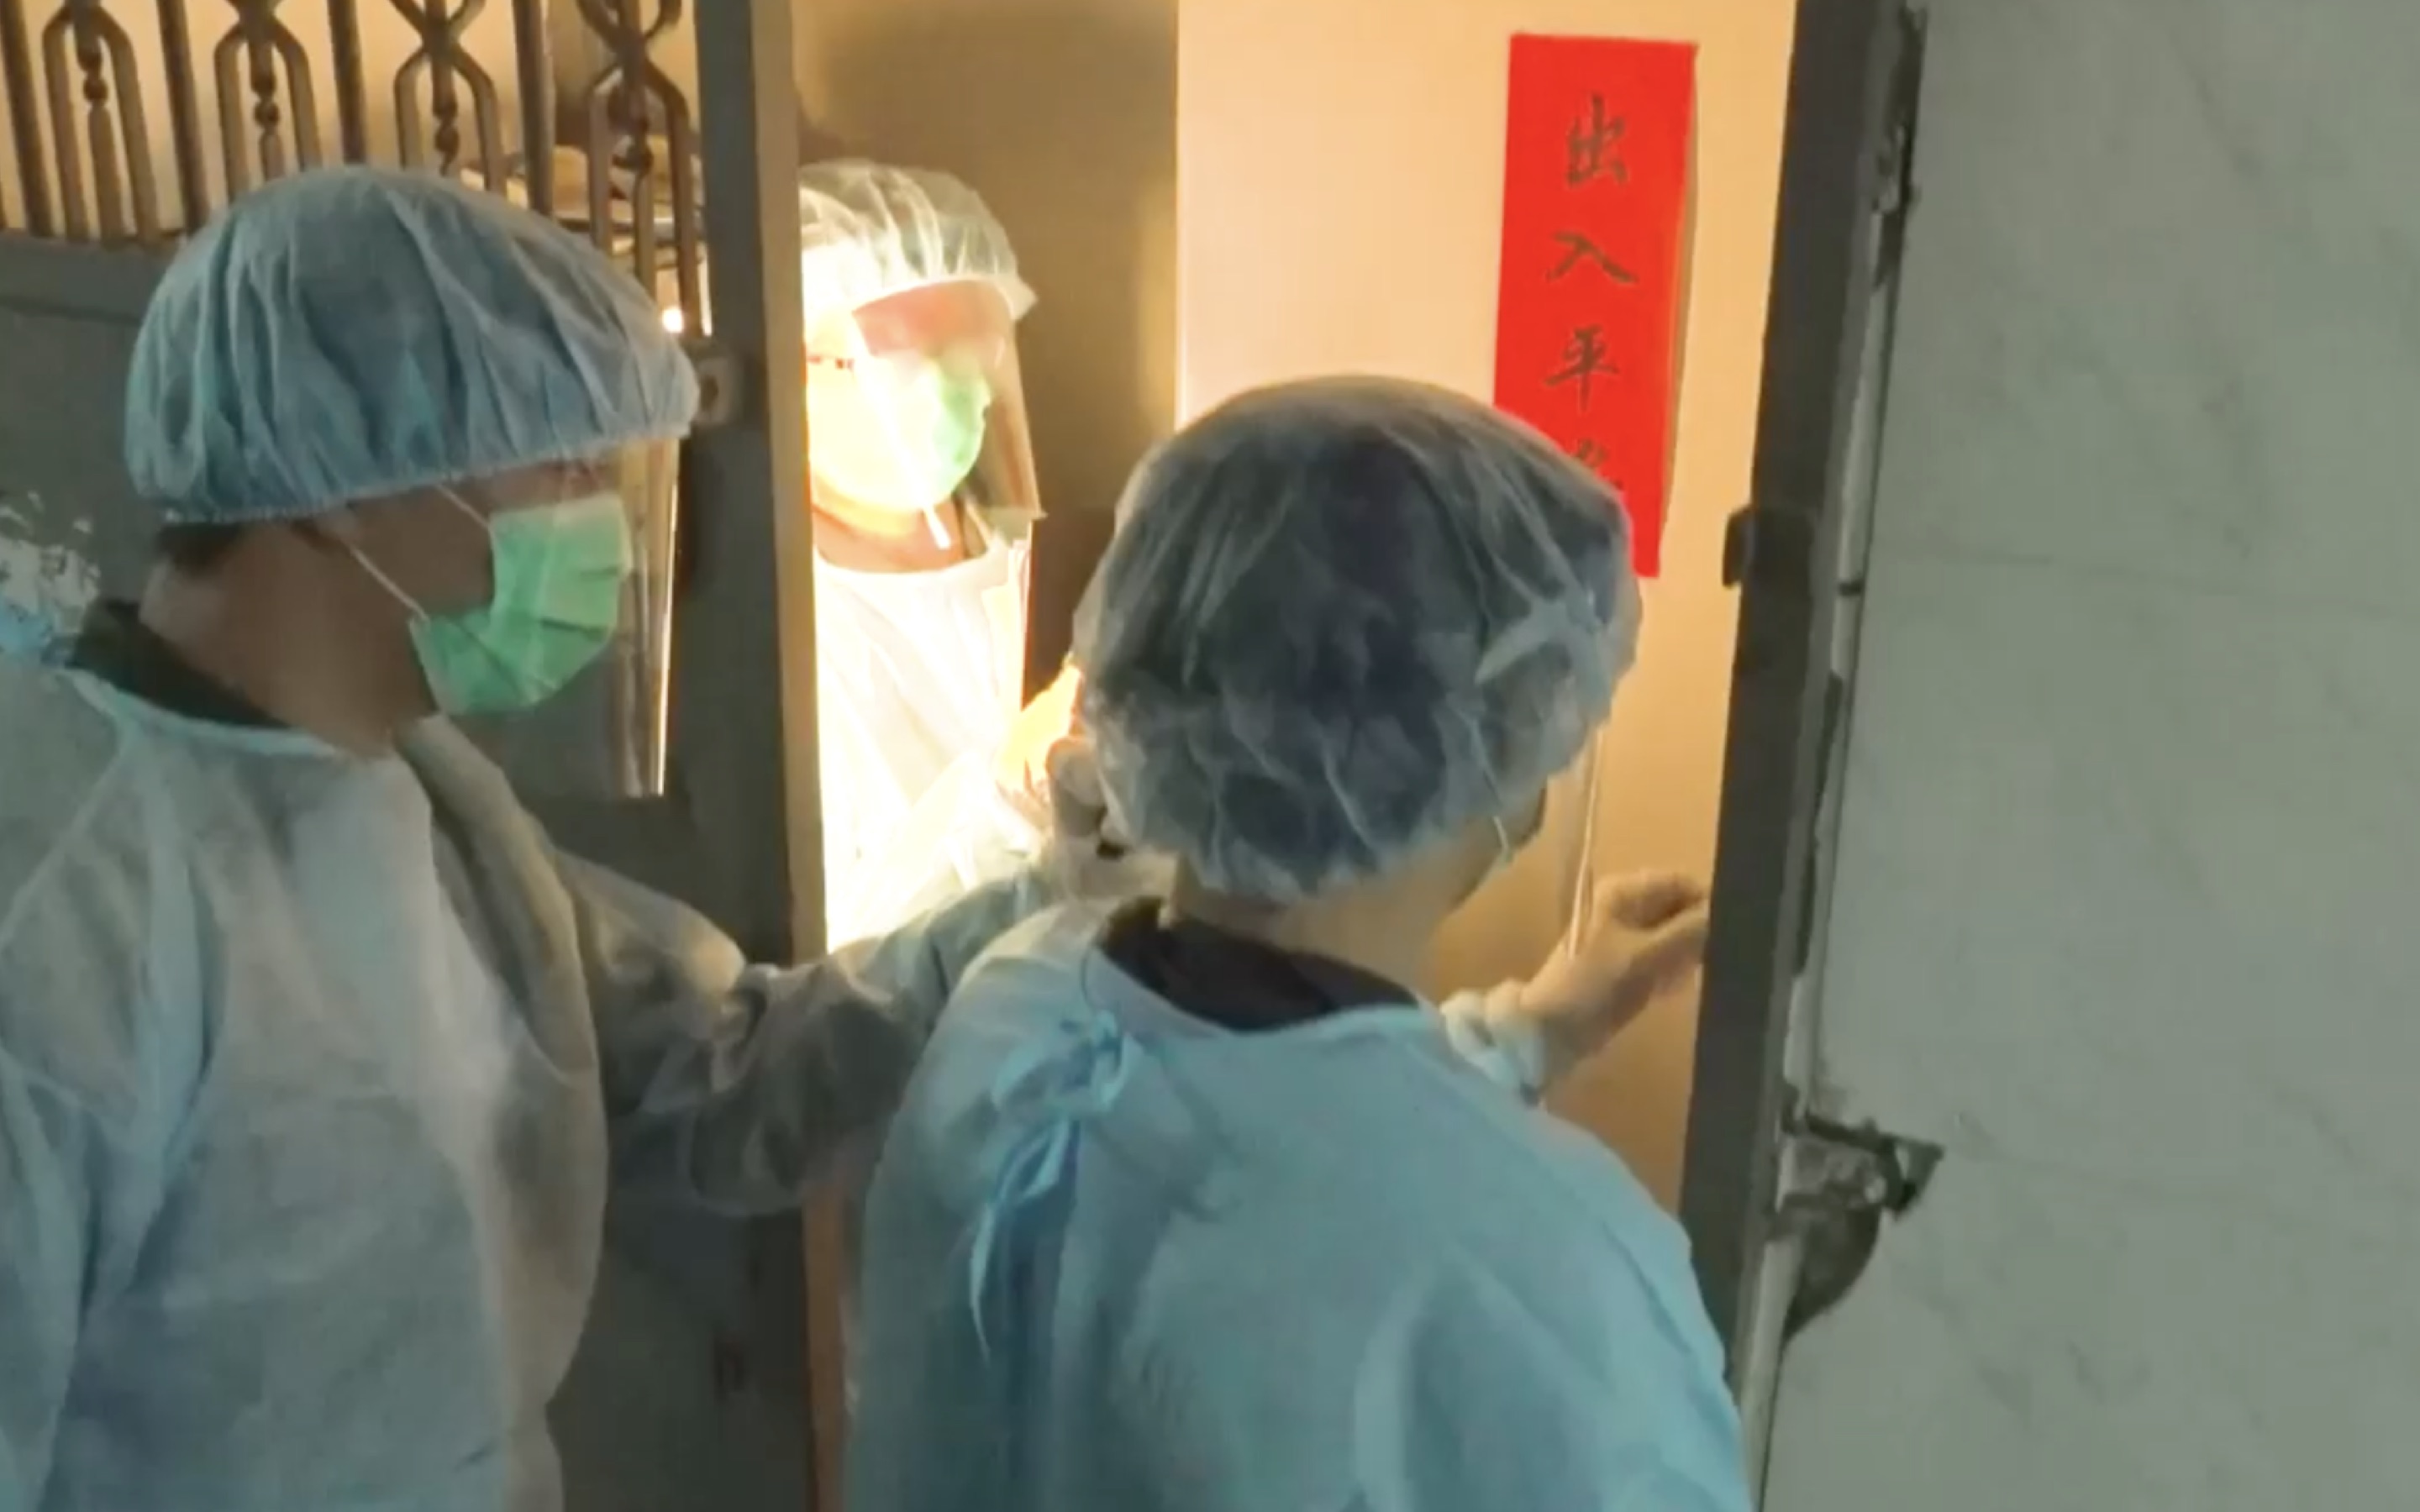 Centre for Health Protection personnel taking samples at a party room in Kwun Tong after 10 out of 19 people who went to a hot pot party in the room tested positive for the coronavirus. Screengrab via Facebook video/RTHK.